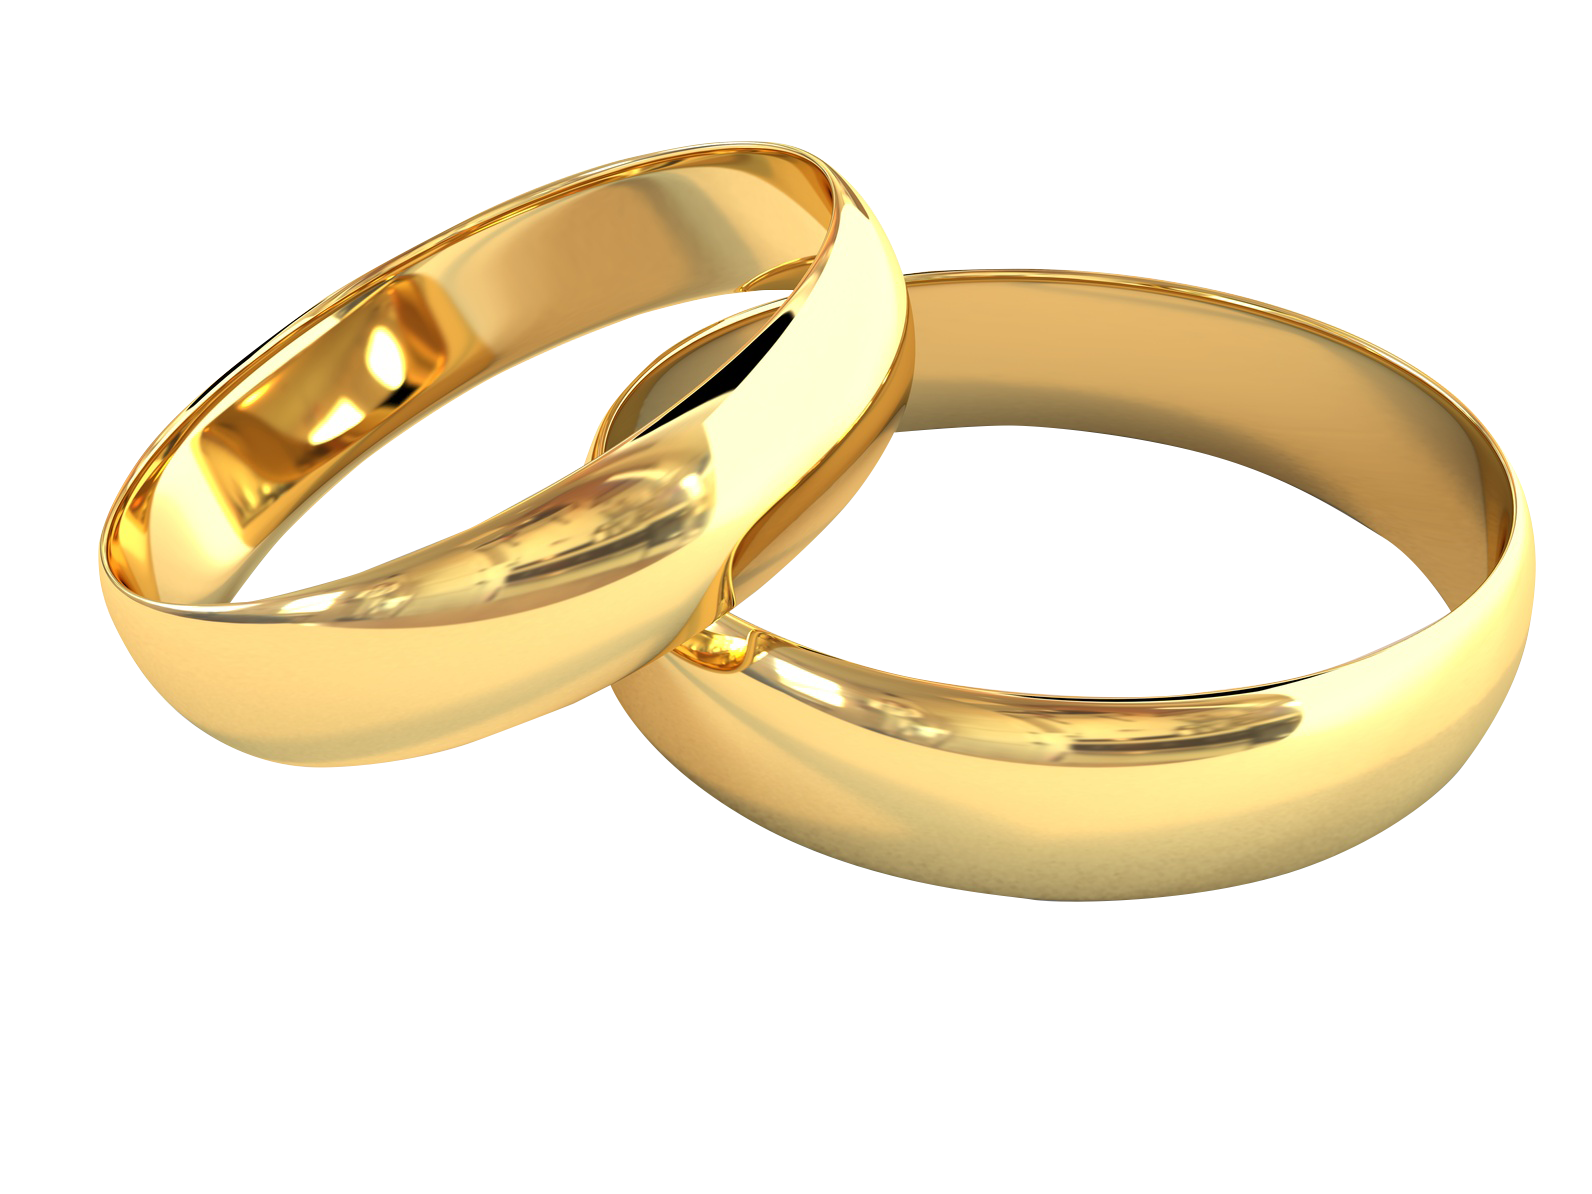 Golden Rings Png Image - Rings Wedding, Transparent background PNG HD thumbnail